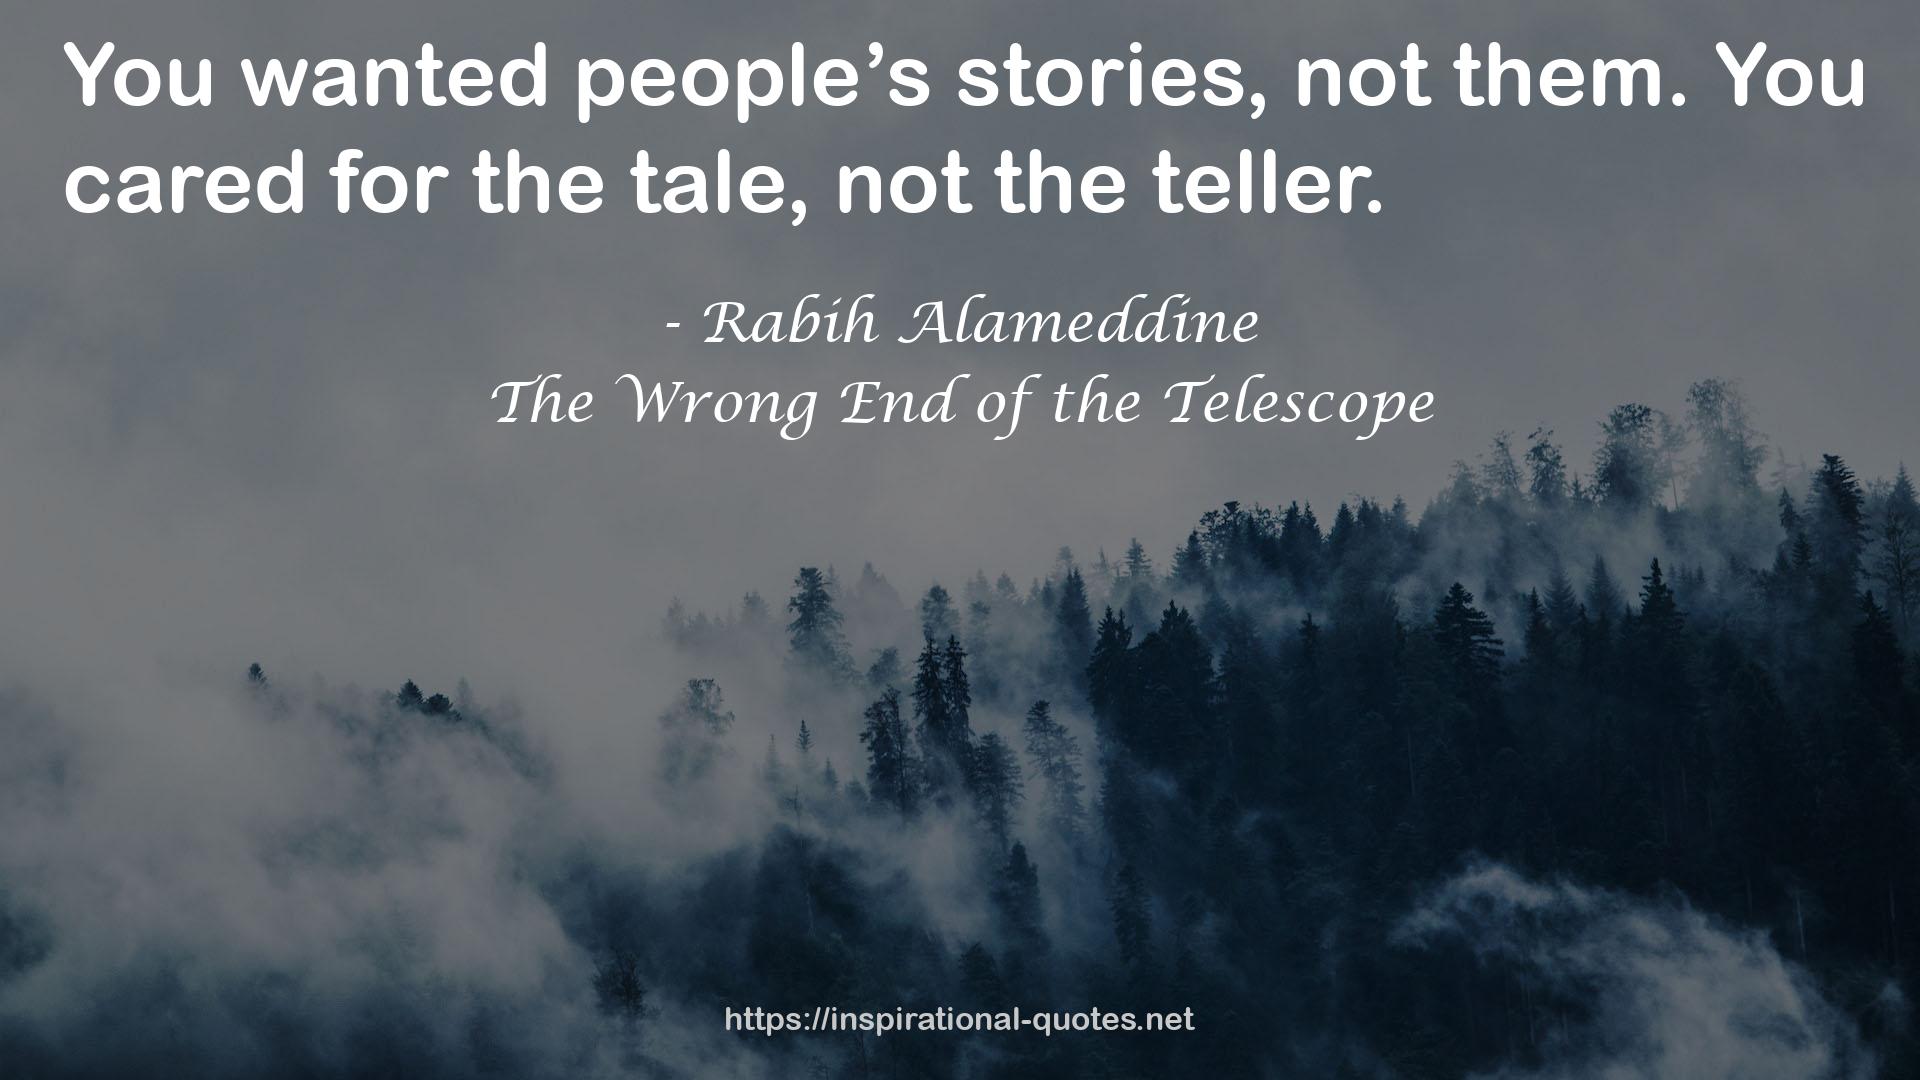 The Wrong End of the Telescope QUOTES